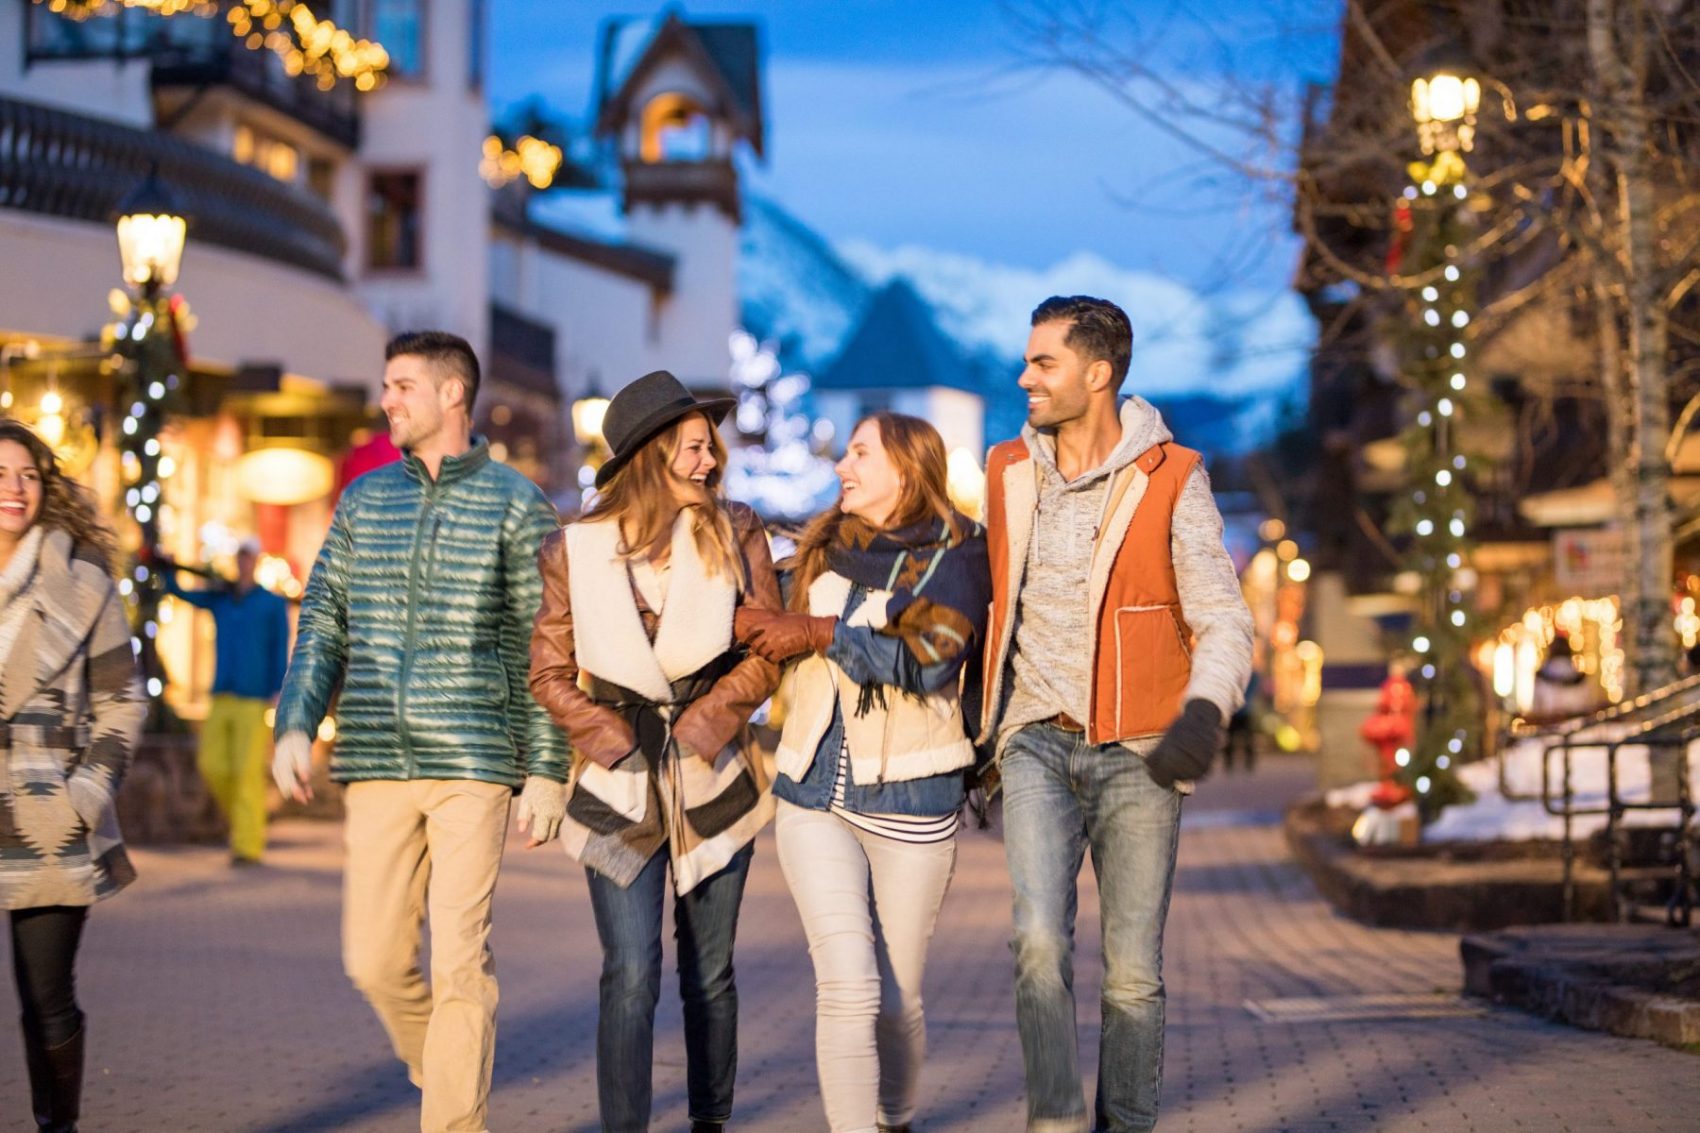 Young and Independents walk in the outdoor nightlife in Vail, CO. Photo: Craig Orsini. Vail Resorts. The Must-Read Guide to Vail.